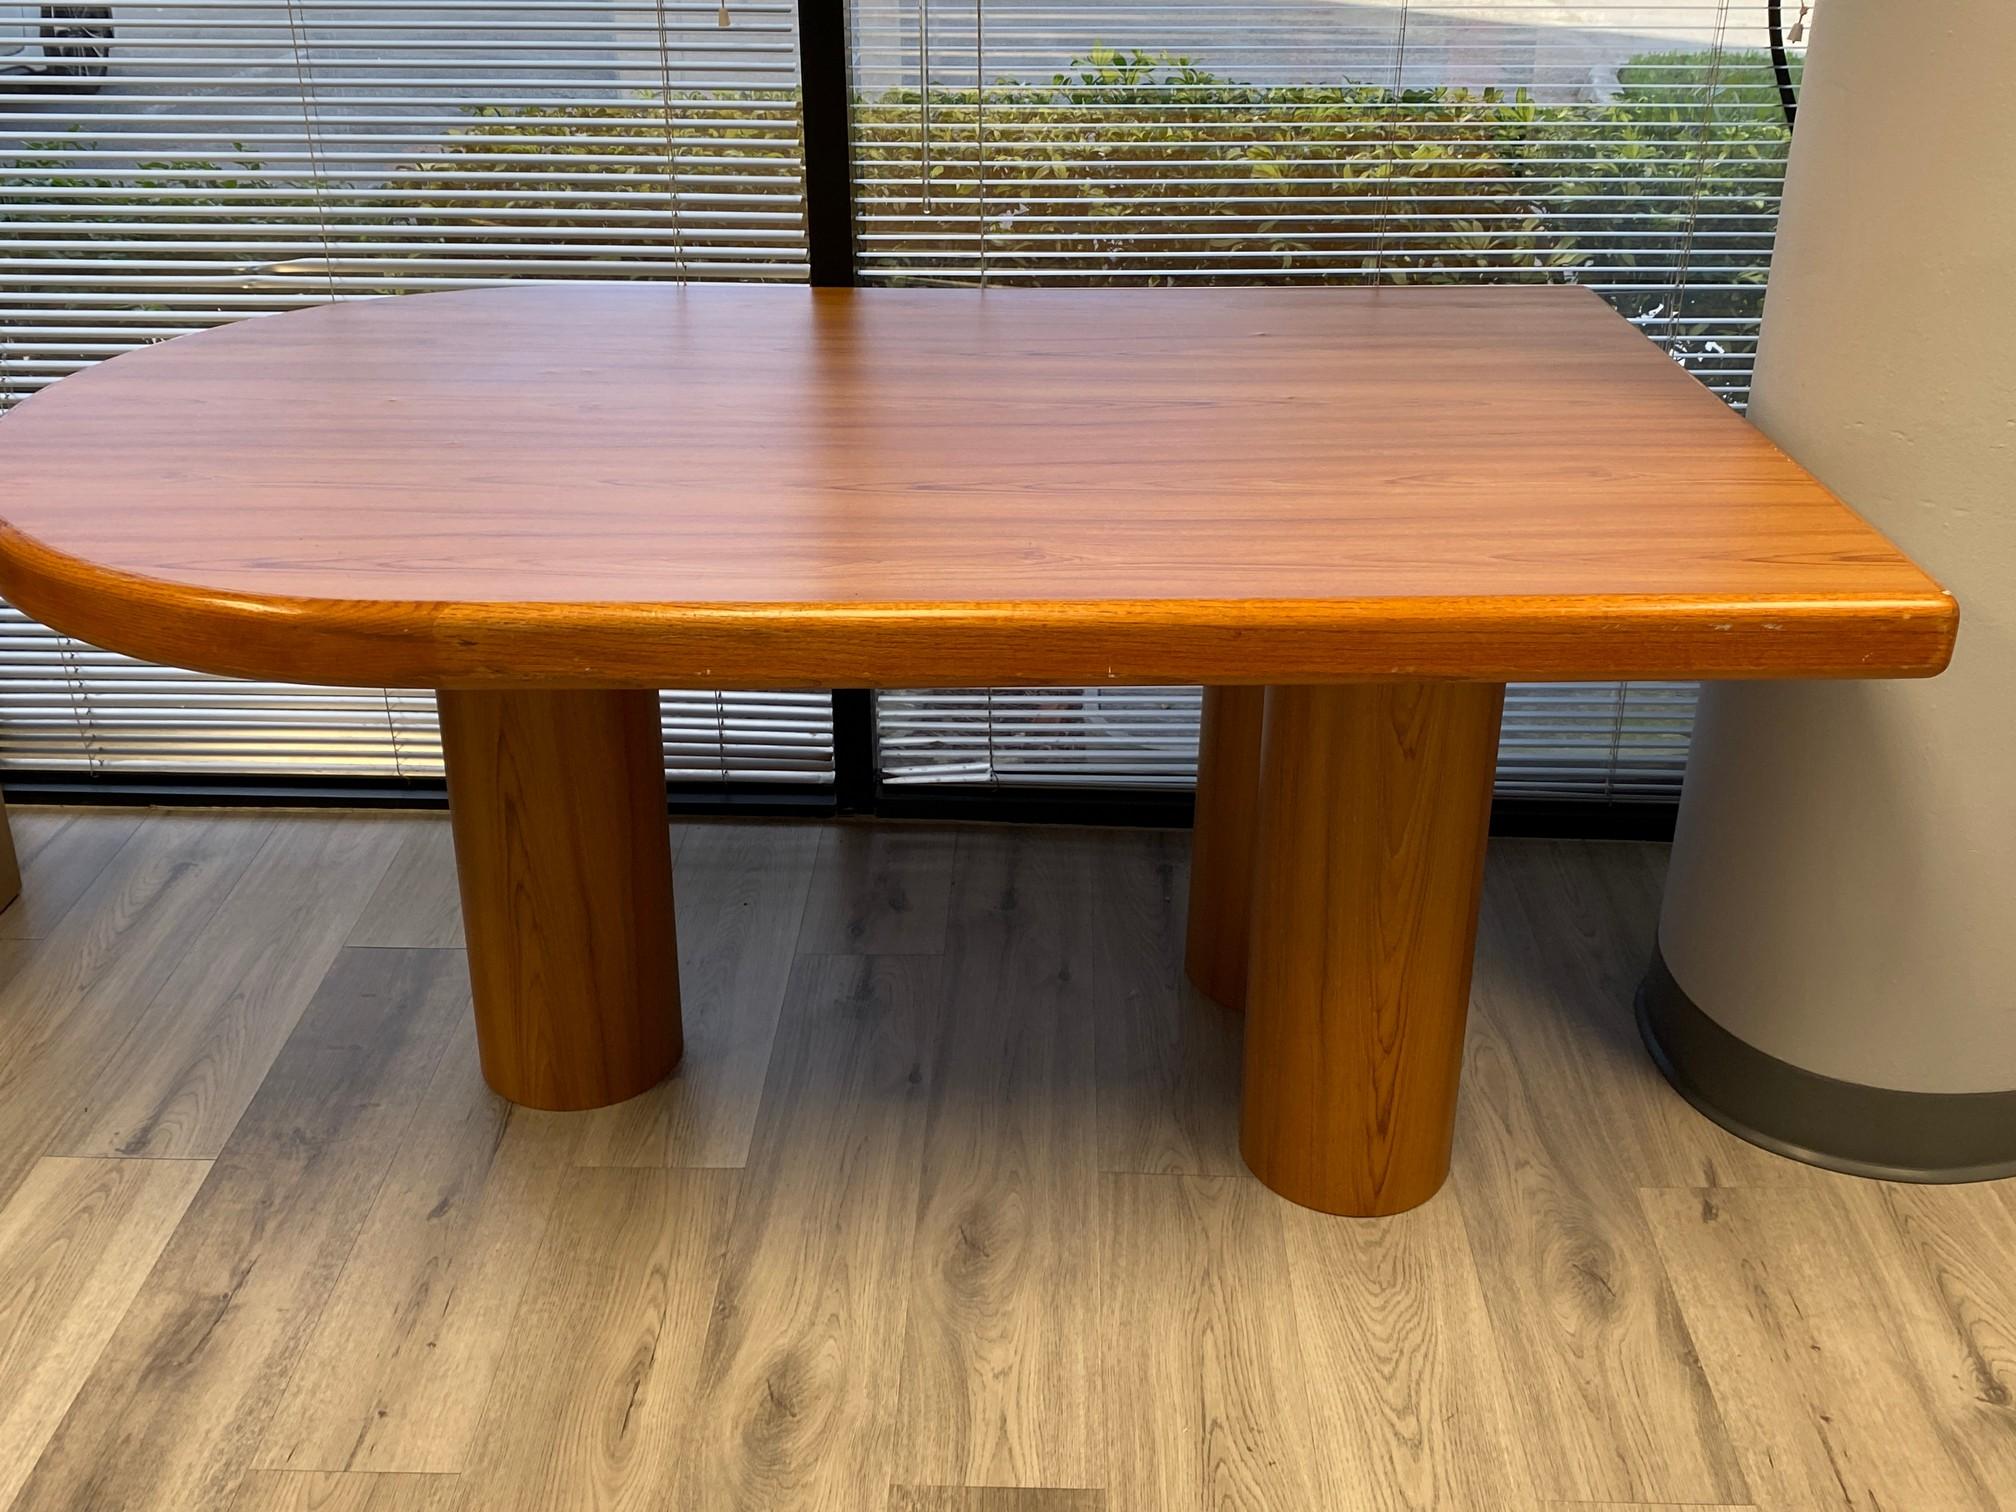 5' Wood Finish Double Pedestal Table